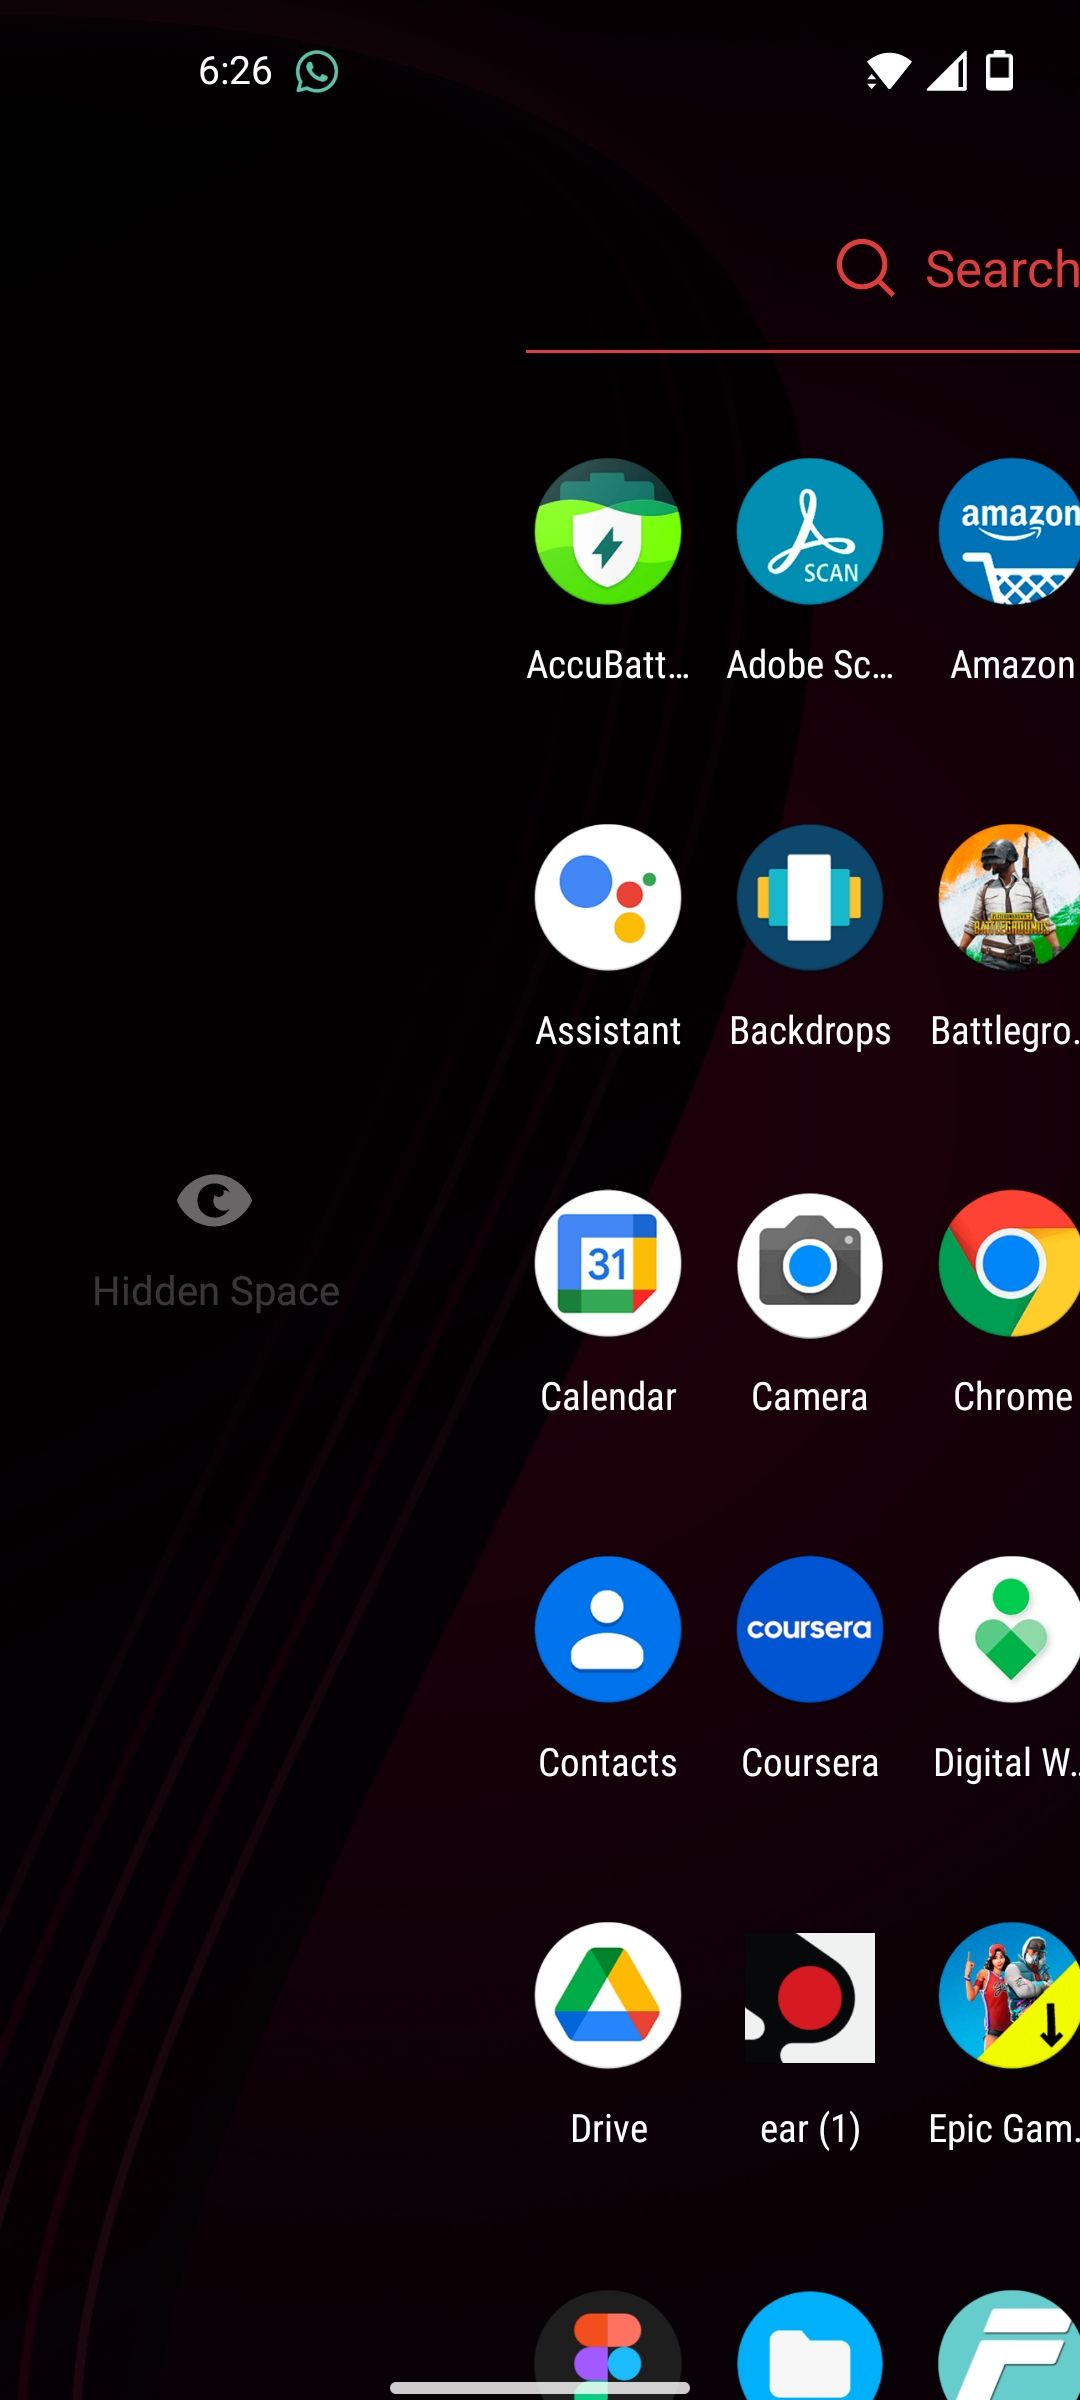 Accessing hidden space in OxygenOS 11